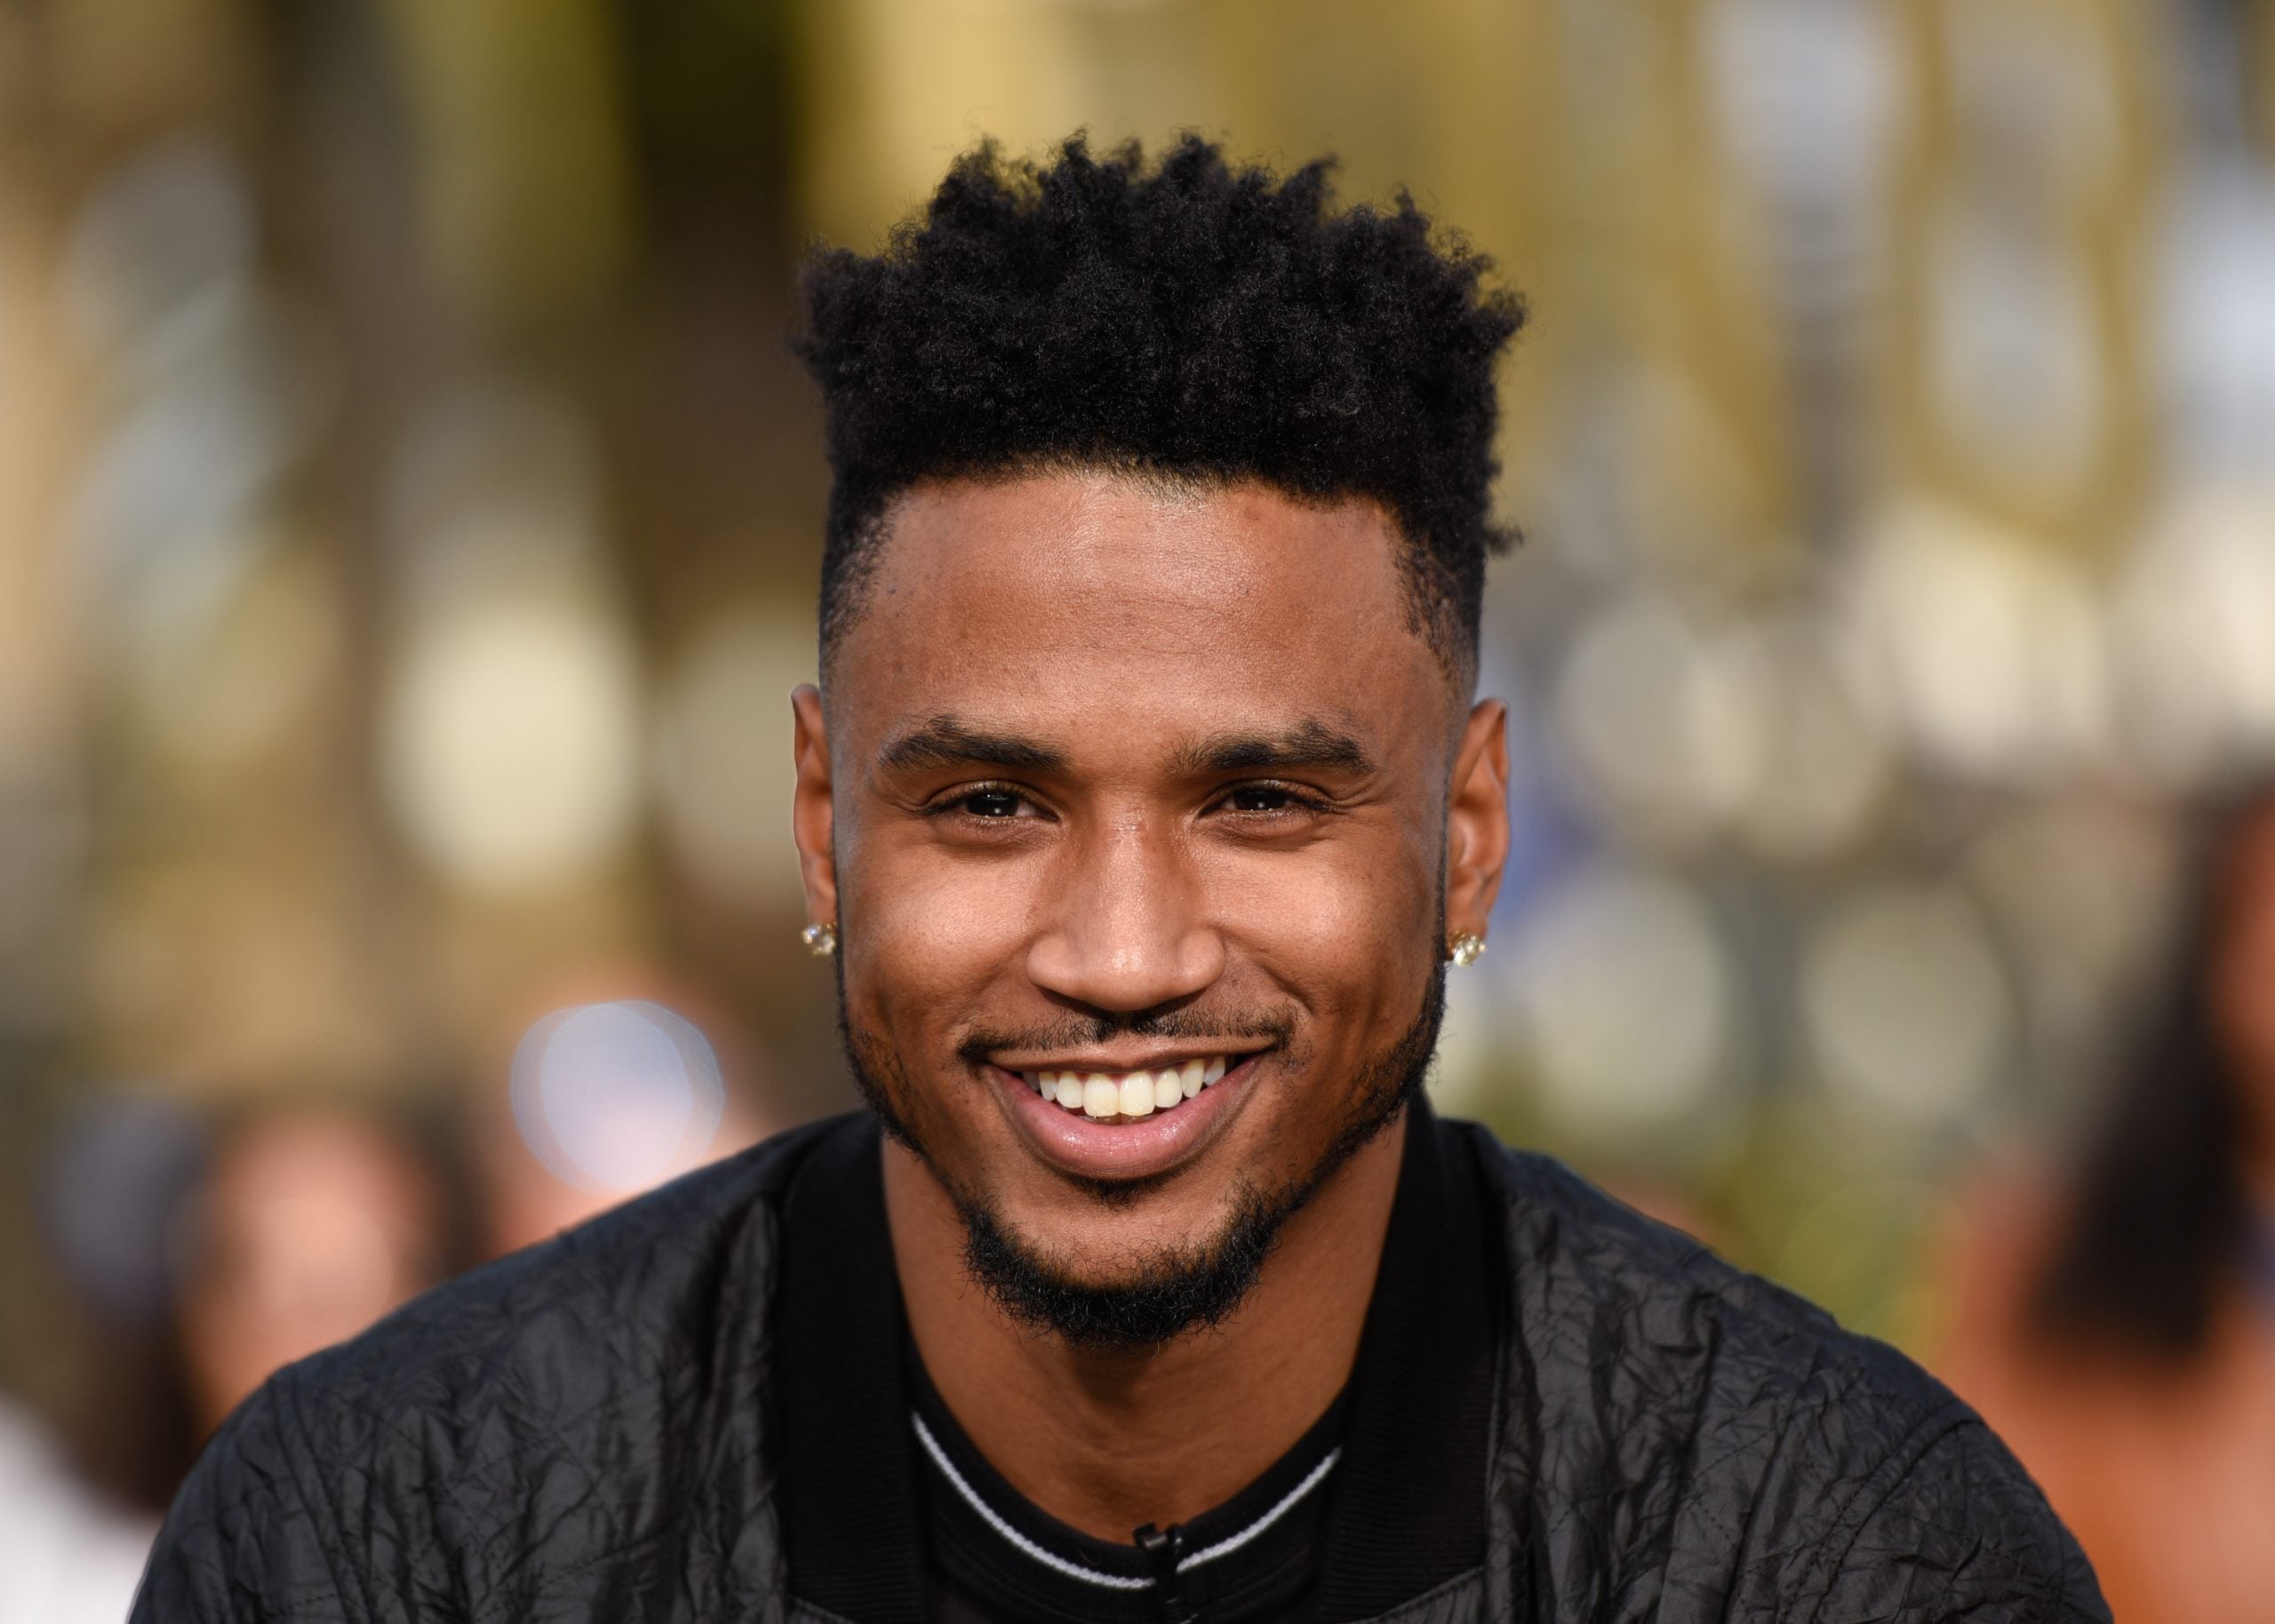 No Lies Told! Trey Songz Schools A Fan About Why We Celebrate Black Love